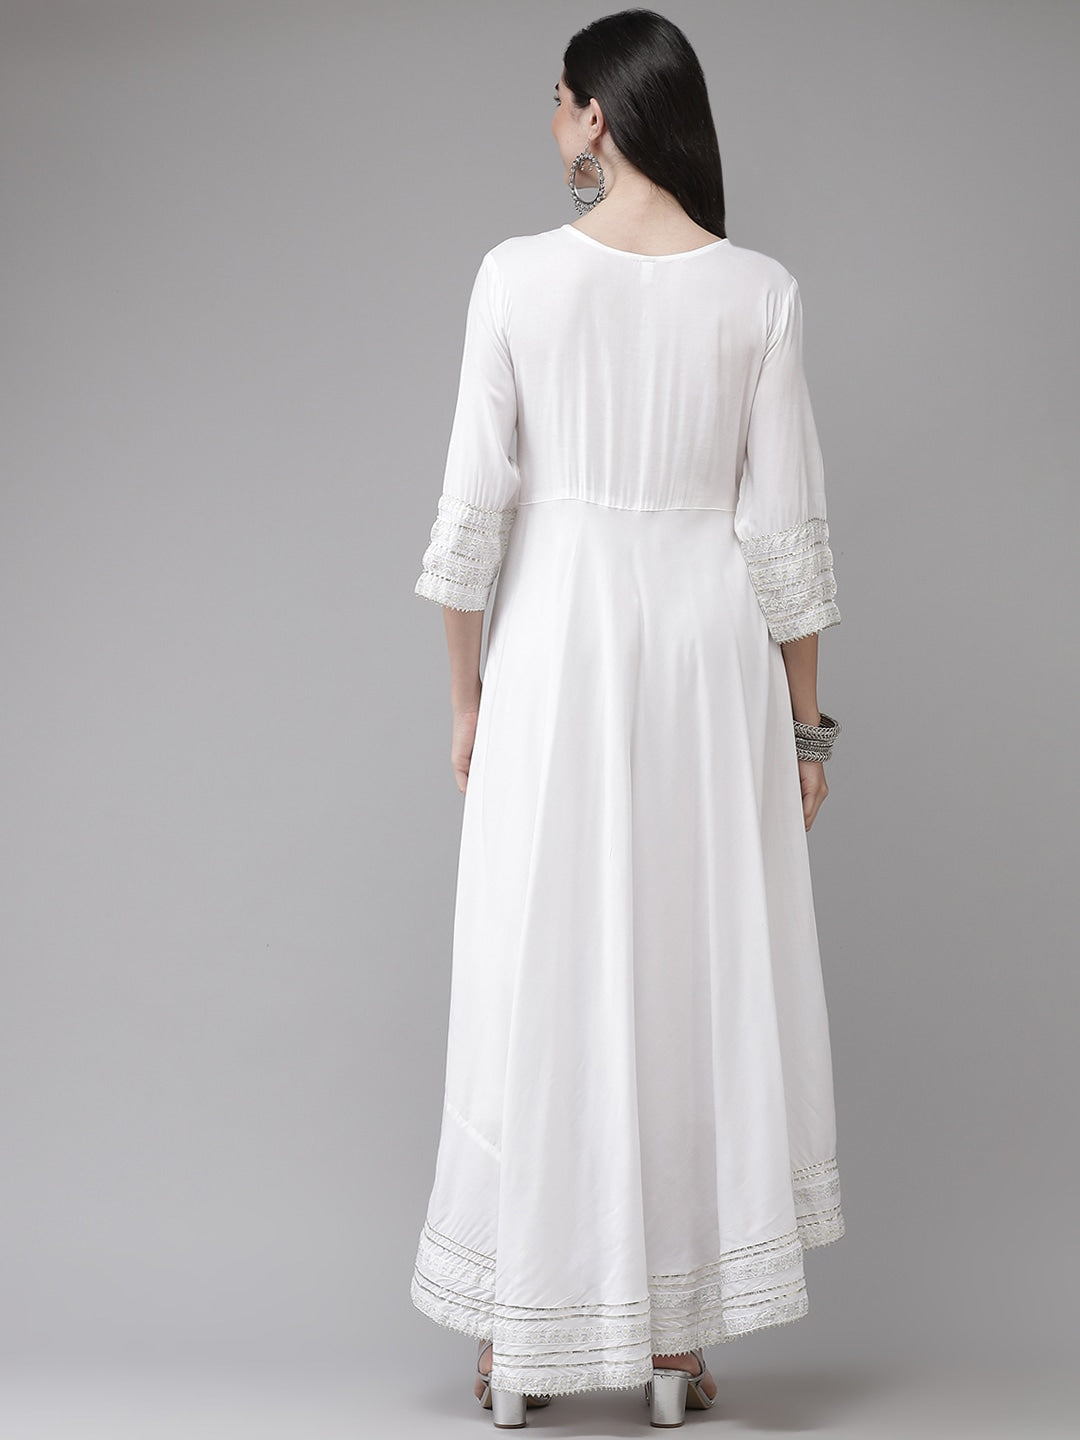 White Embroidered Dress-Yufta Store-2117DRSWHS